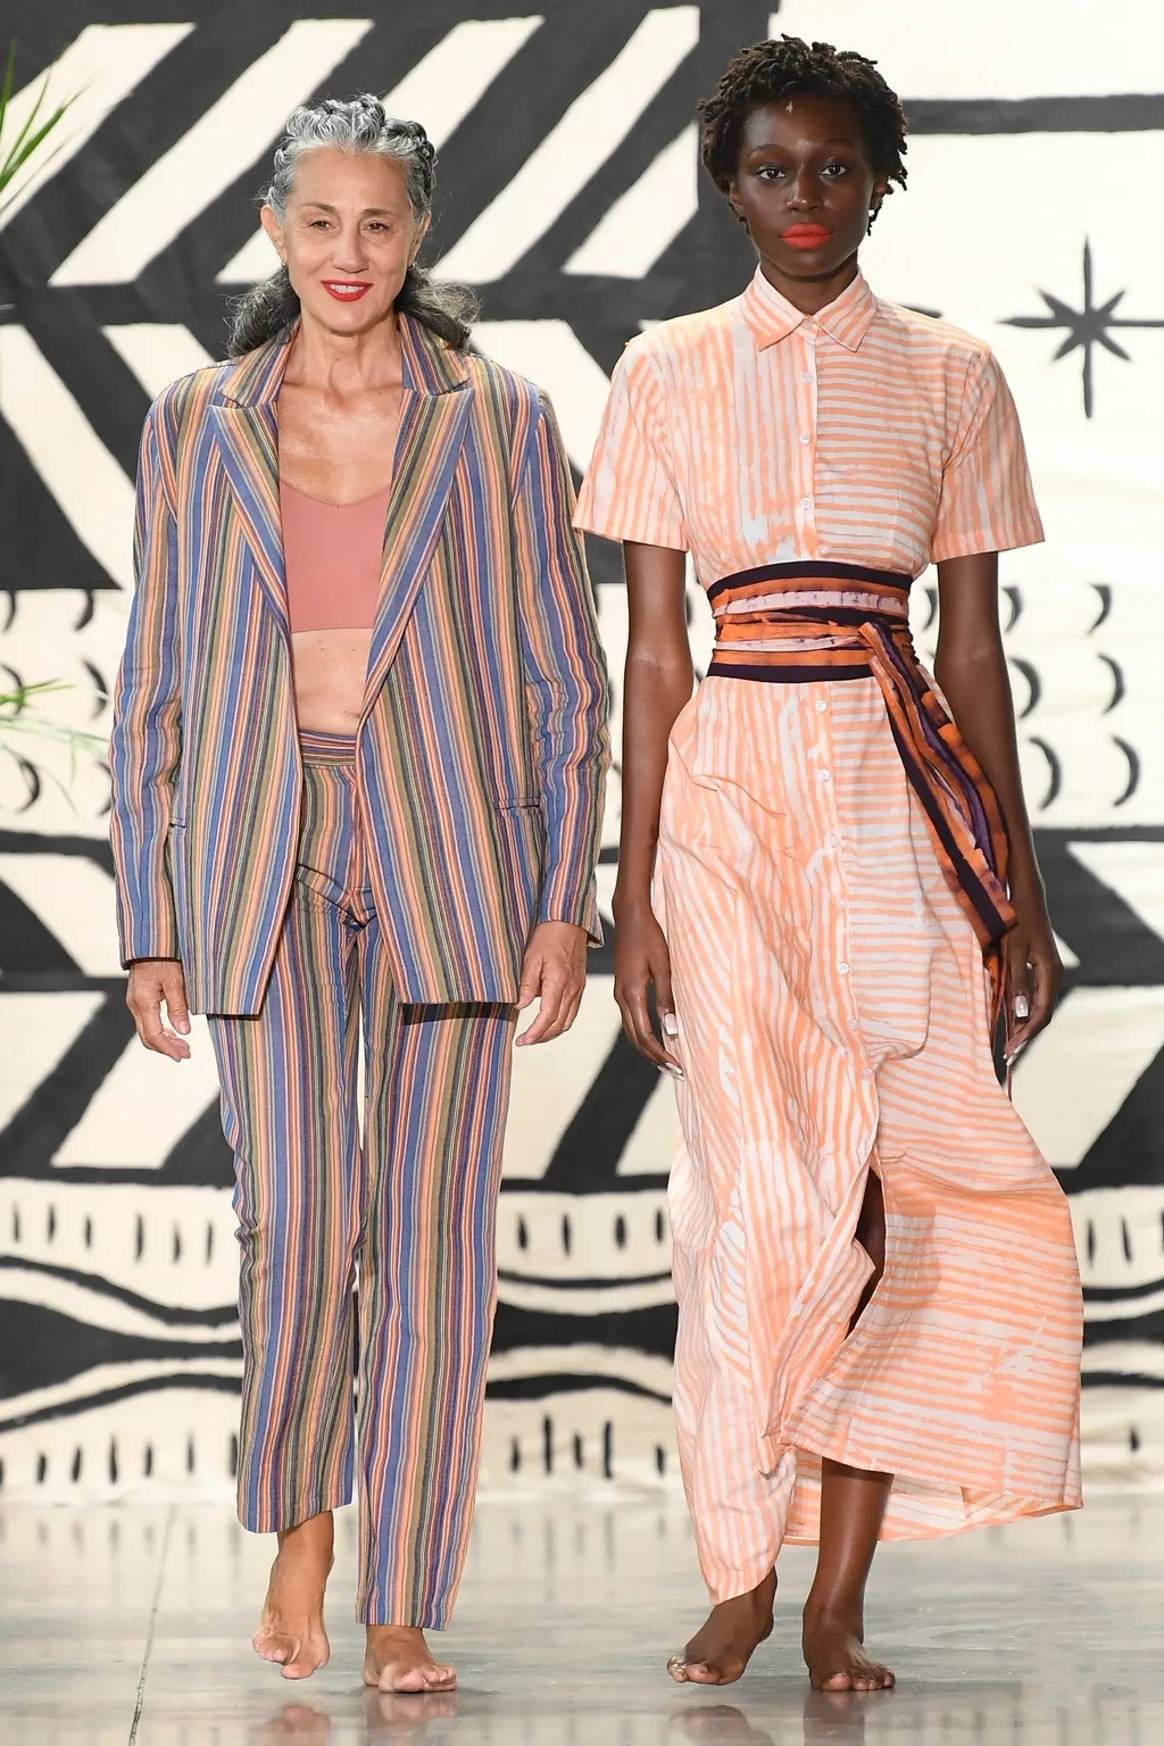 Top three print trends for SS23 from New York Fashion Week